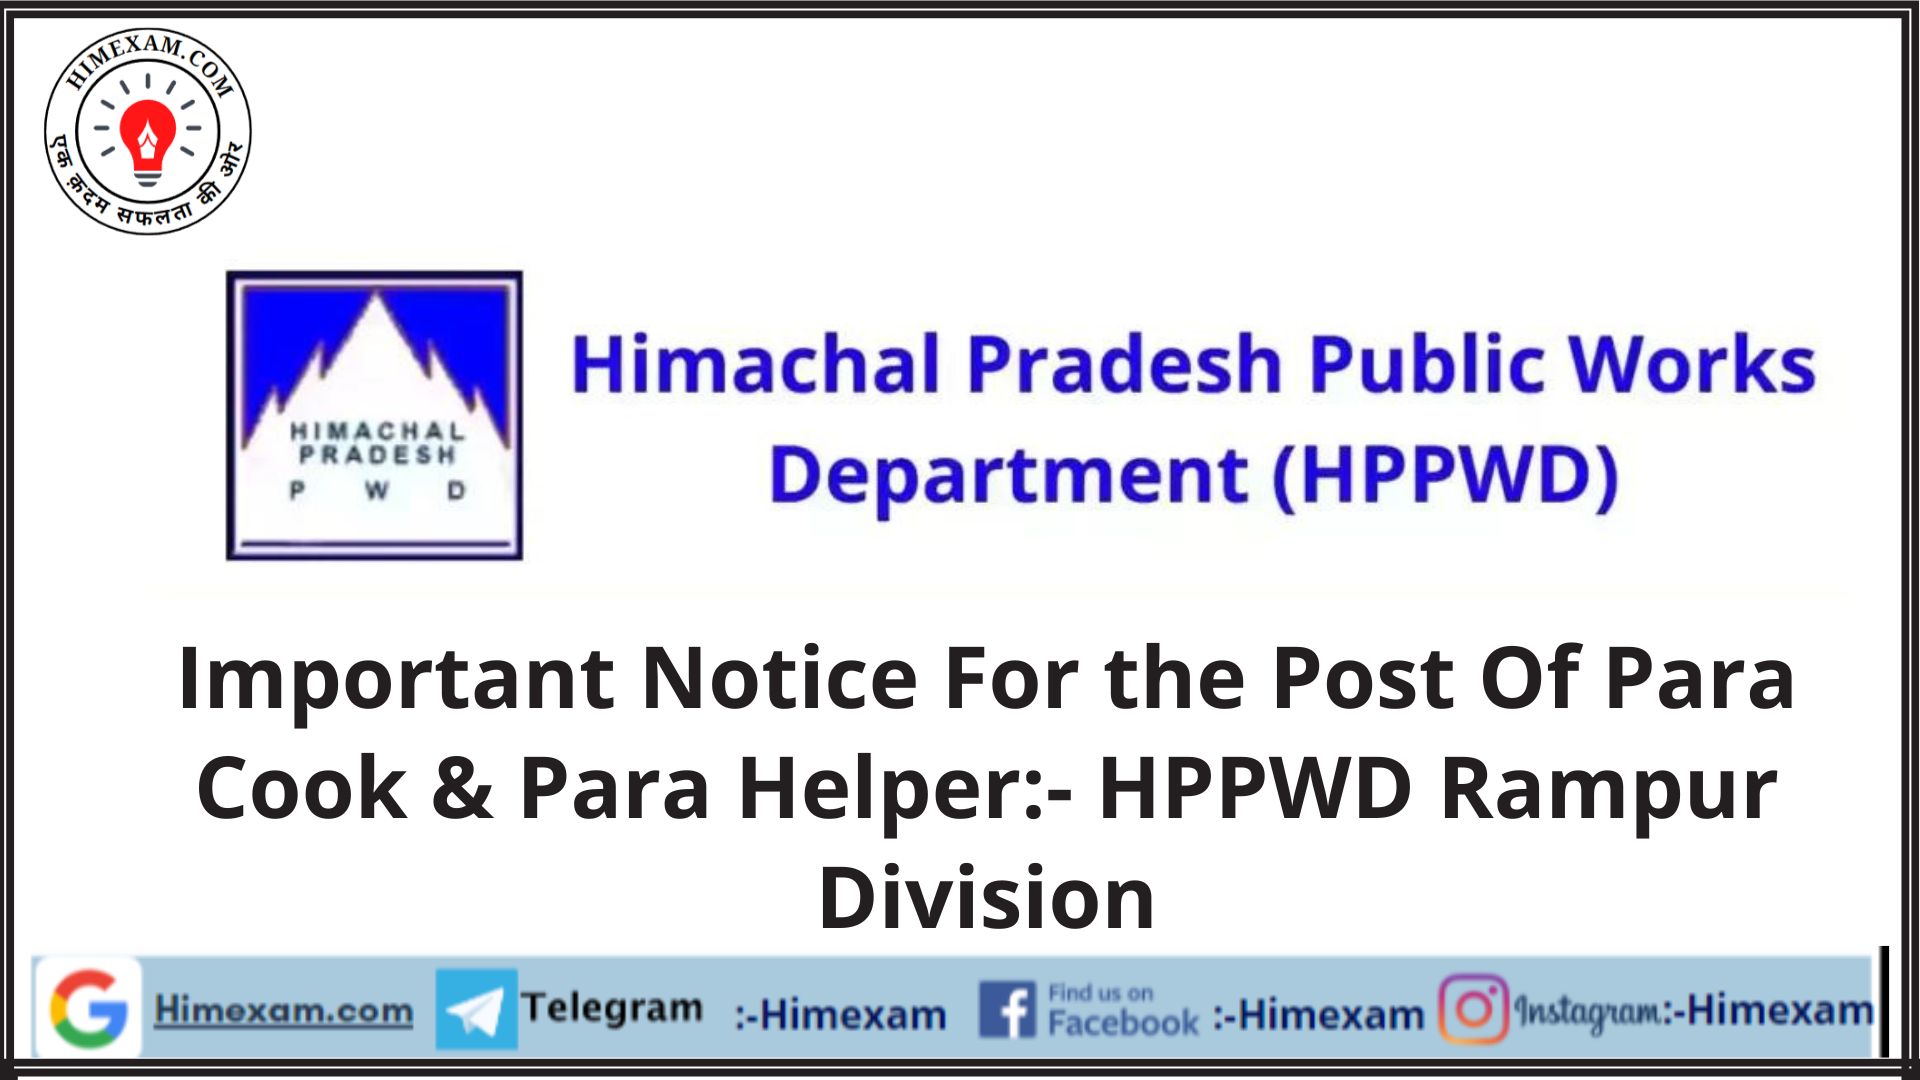 Important Notice For the Post Of Para Cook & Para Helper:- HPPWD Rampur Division